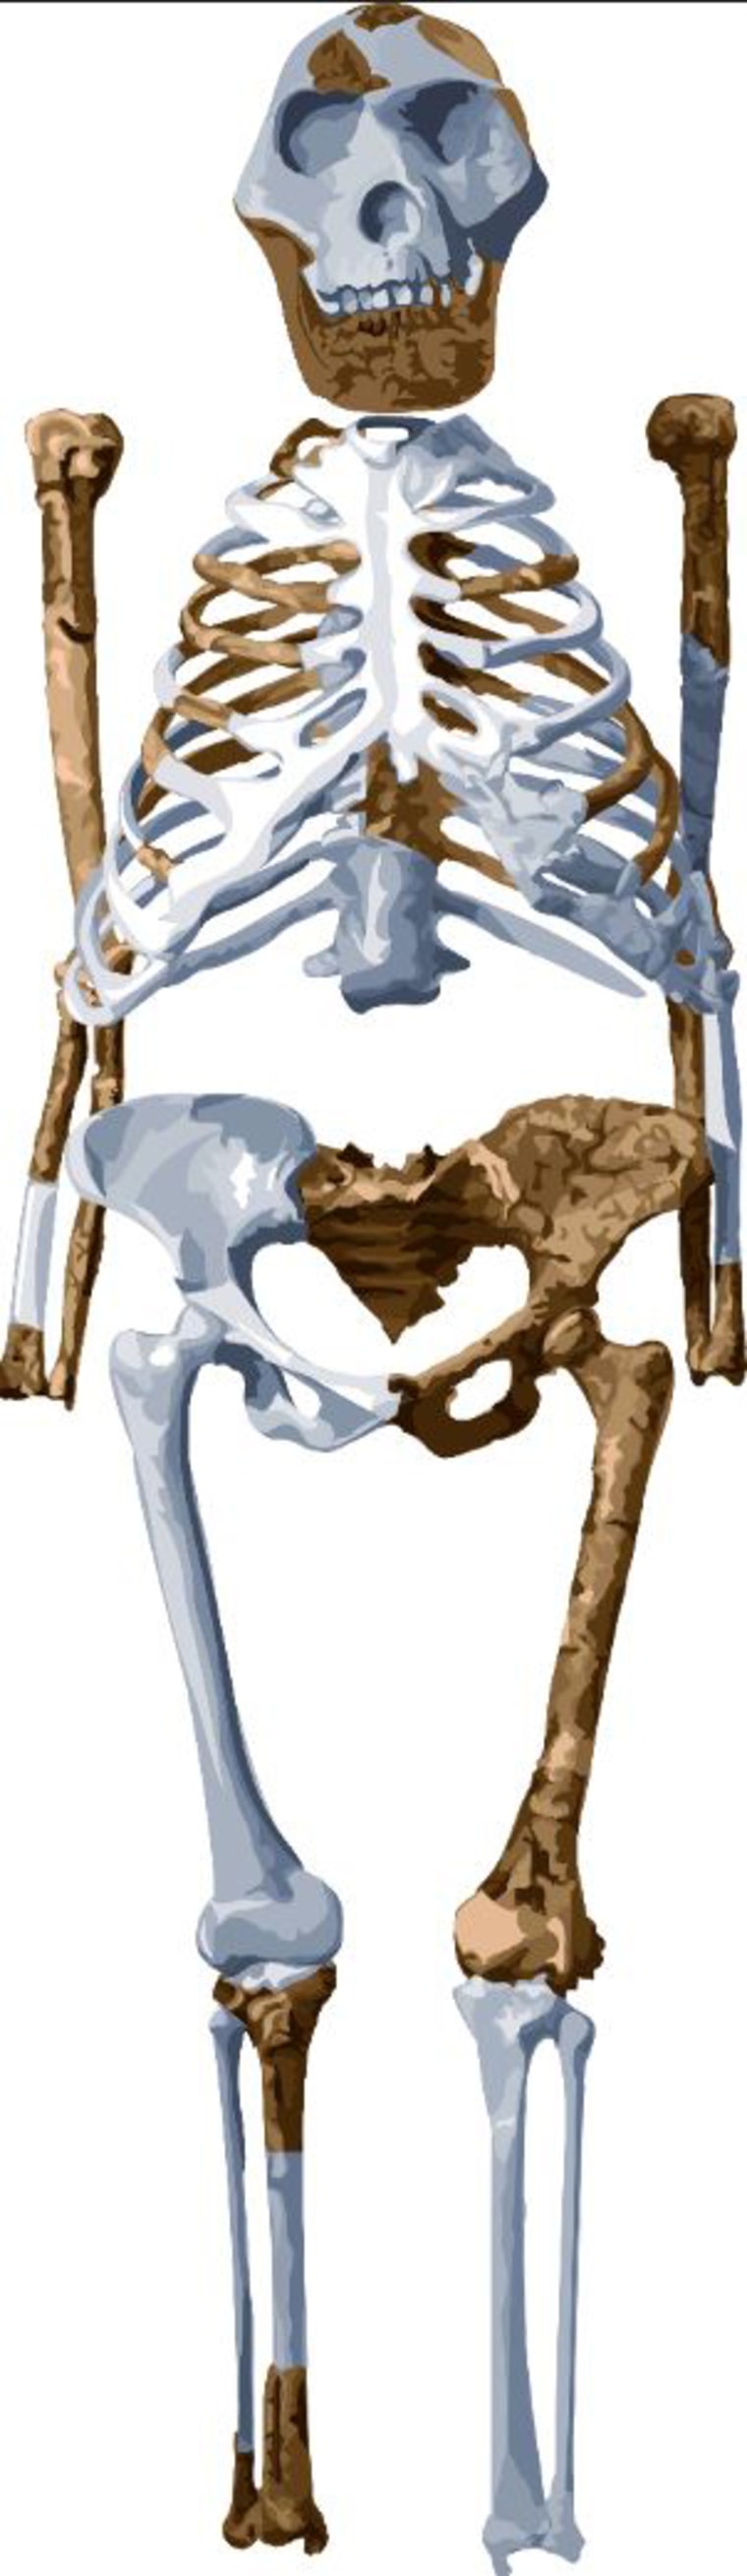 Reconstruction of the famous 3.2 million year old remains of a relatively complete skeleton known as Lucy.